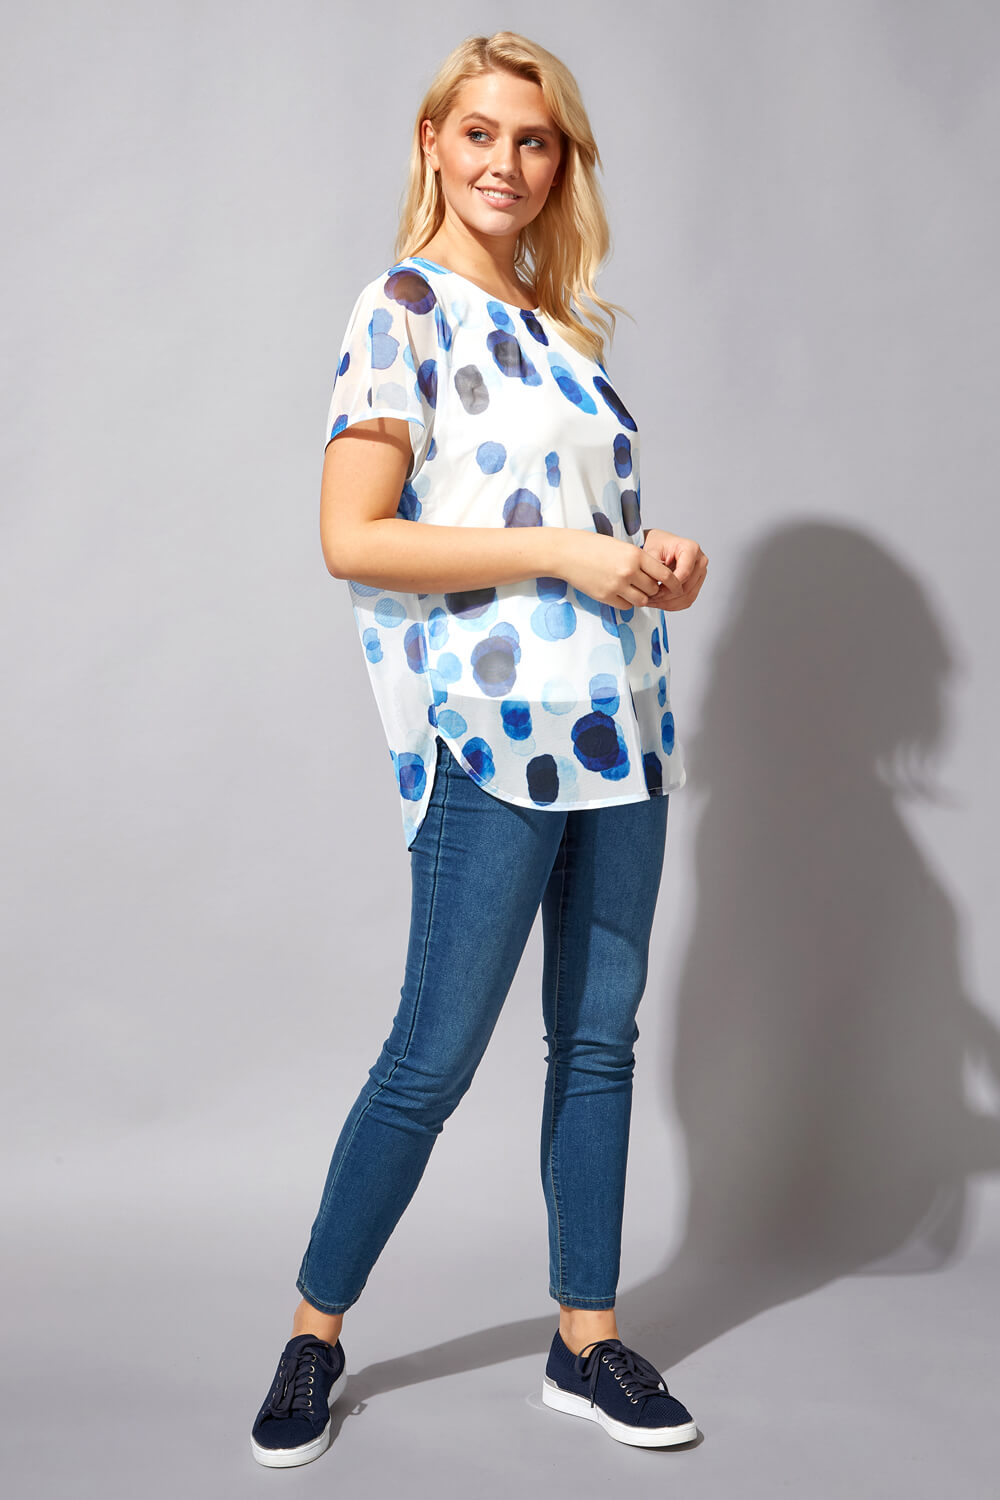 Blue Spot Mesh Overlay Top, Image 2 of 4